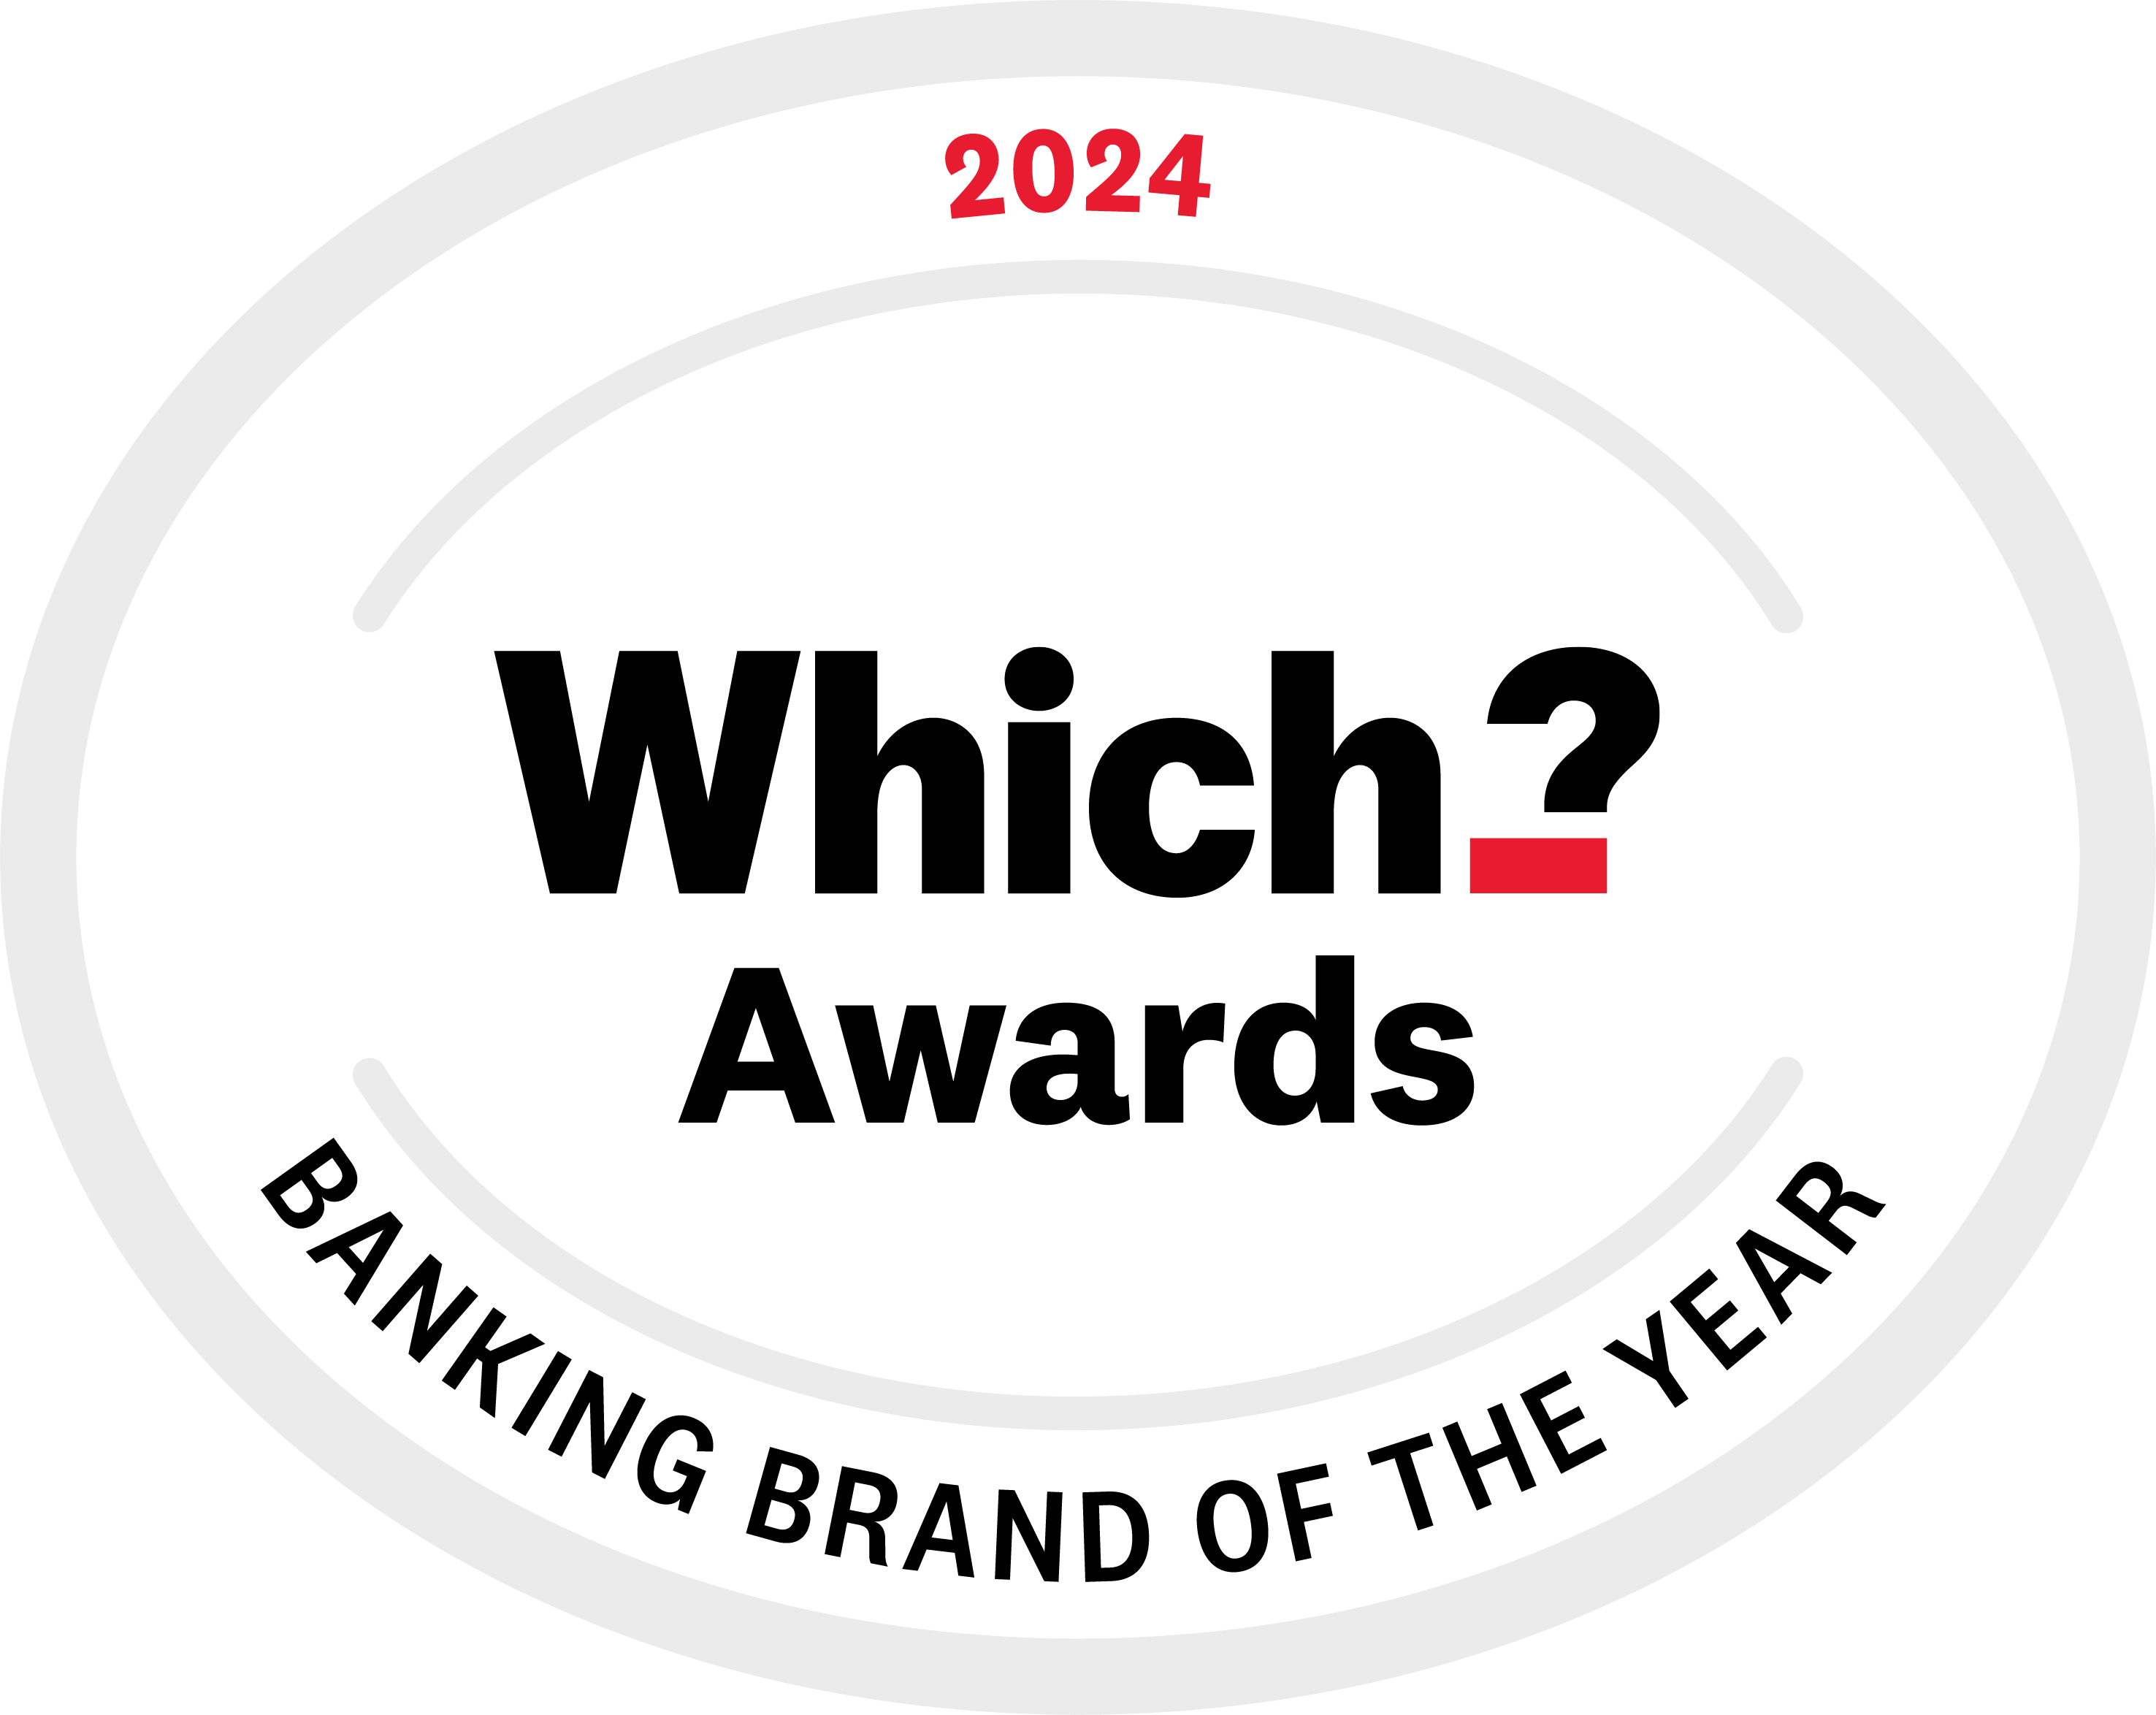 Which badge awards banking brand of the year 2024